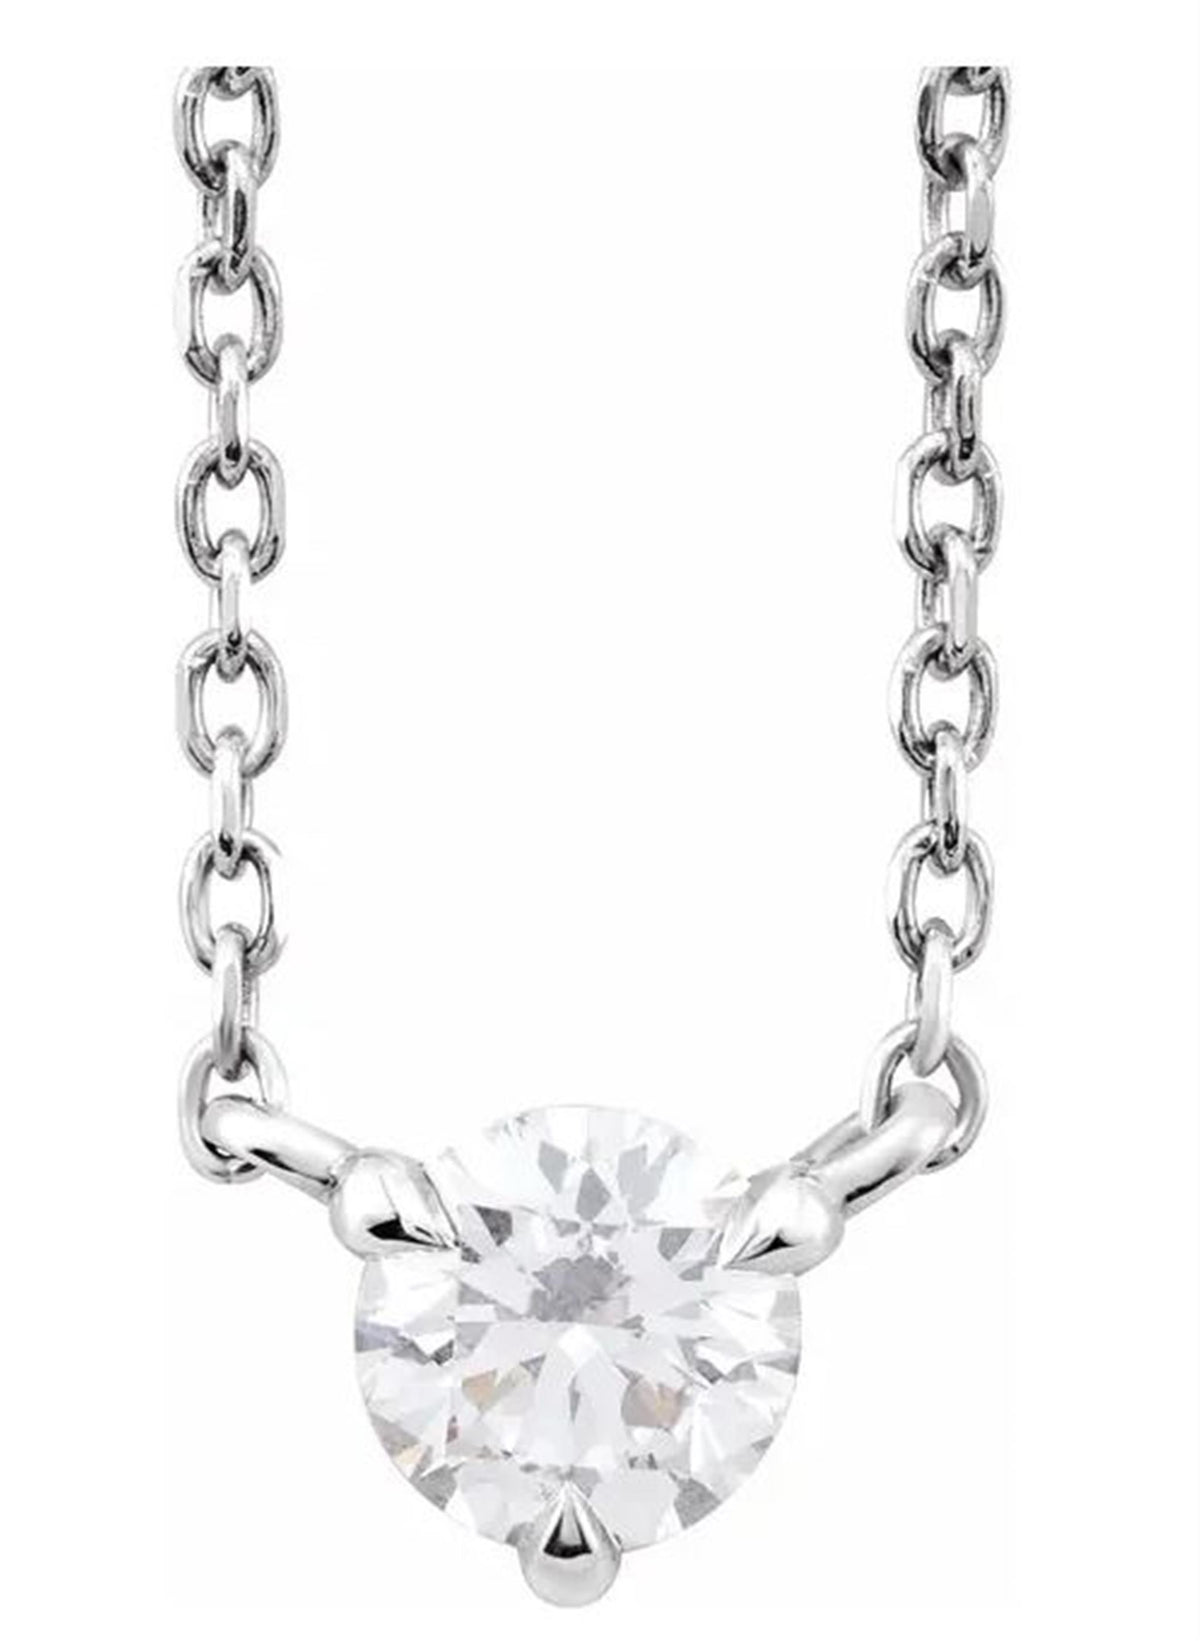 14Kt White Gold Stainary Solitaire Pendant With .24cttw Natural Diamond